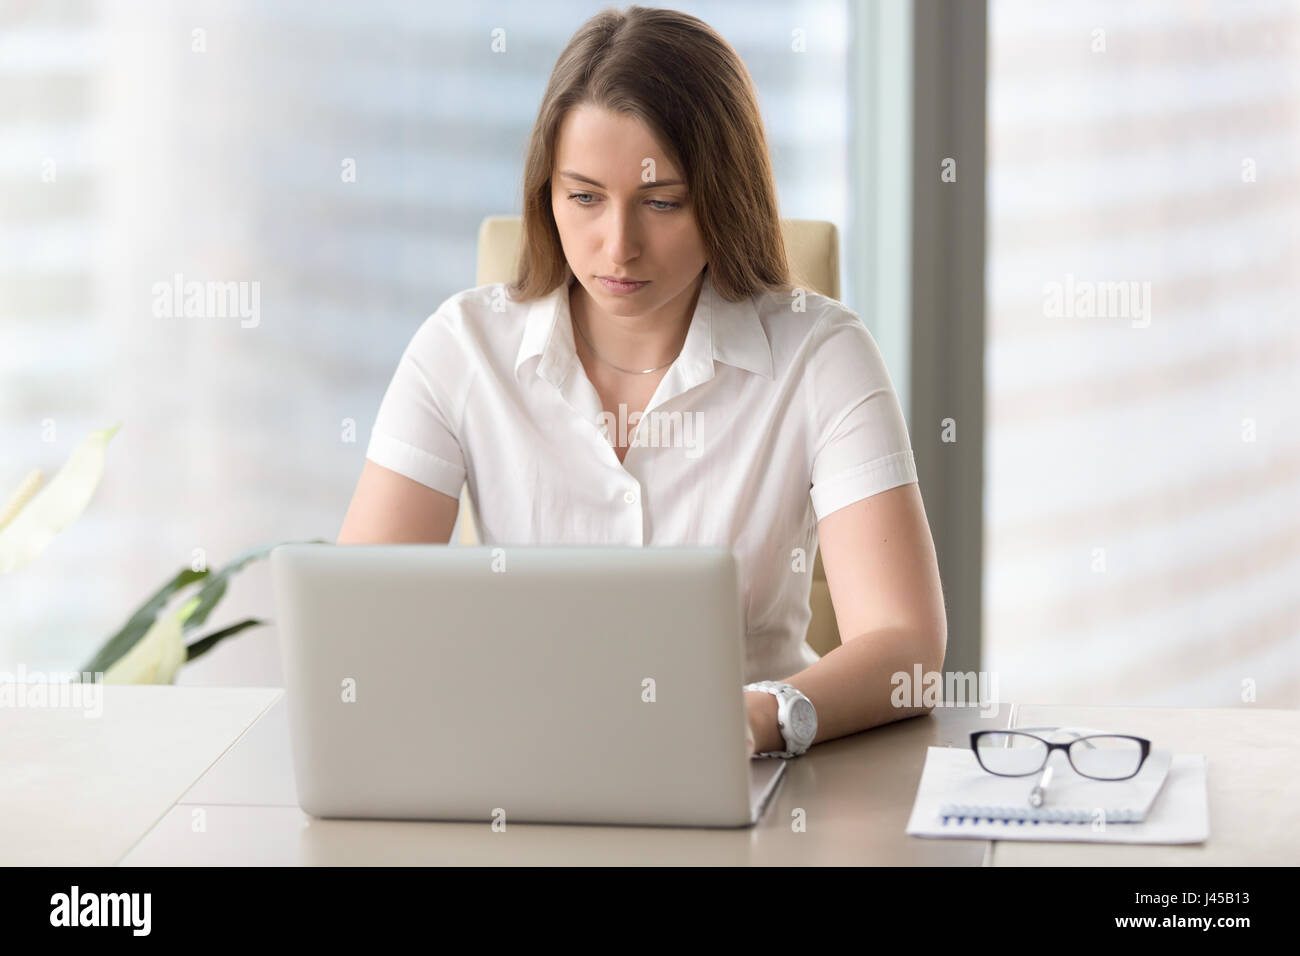 Young businesswoman concentrated on daily tasks Stock Photo